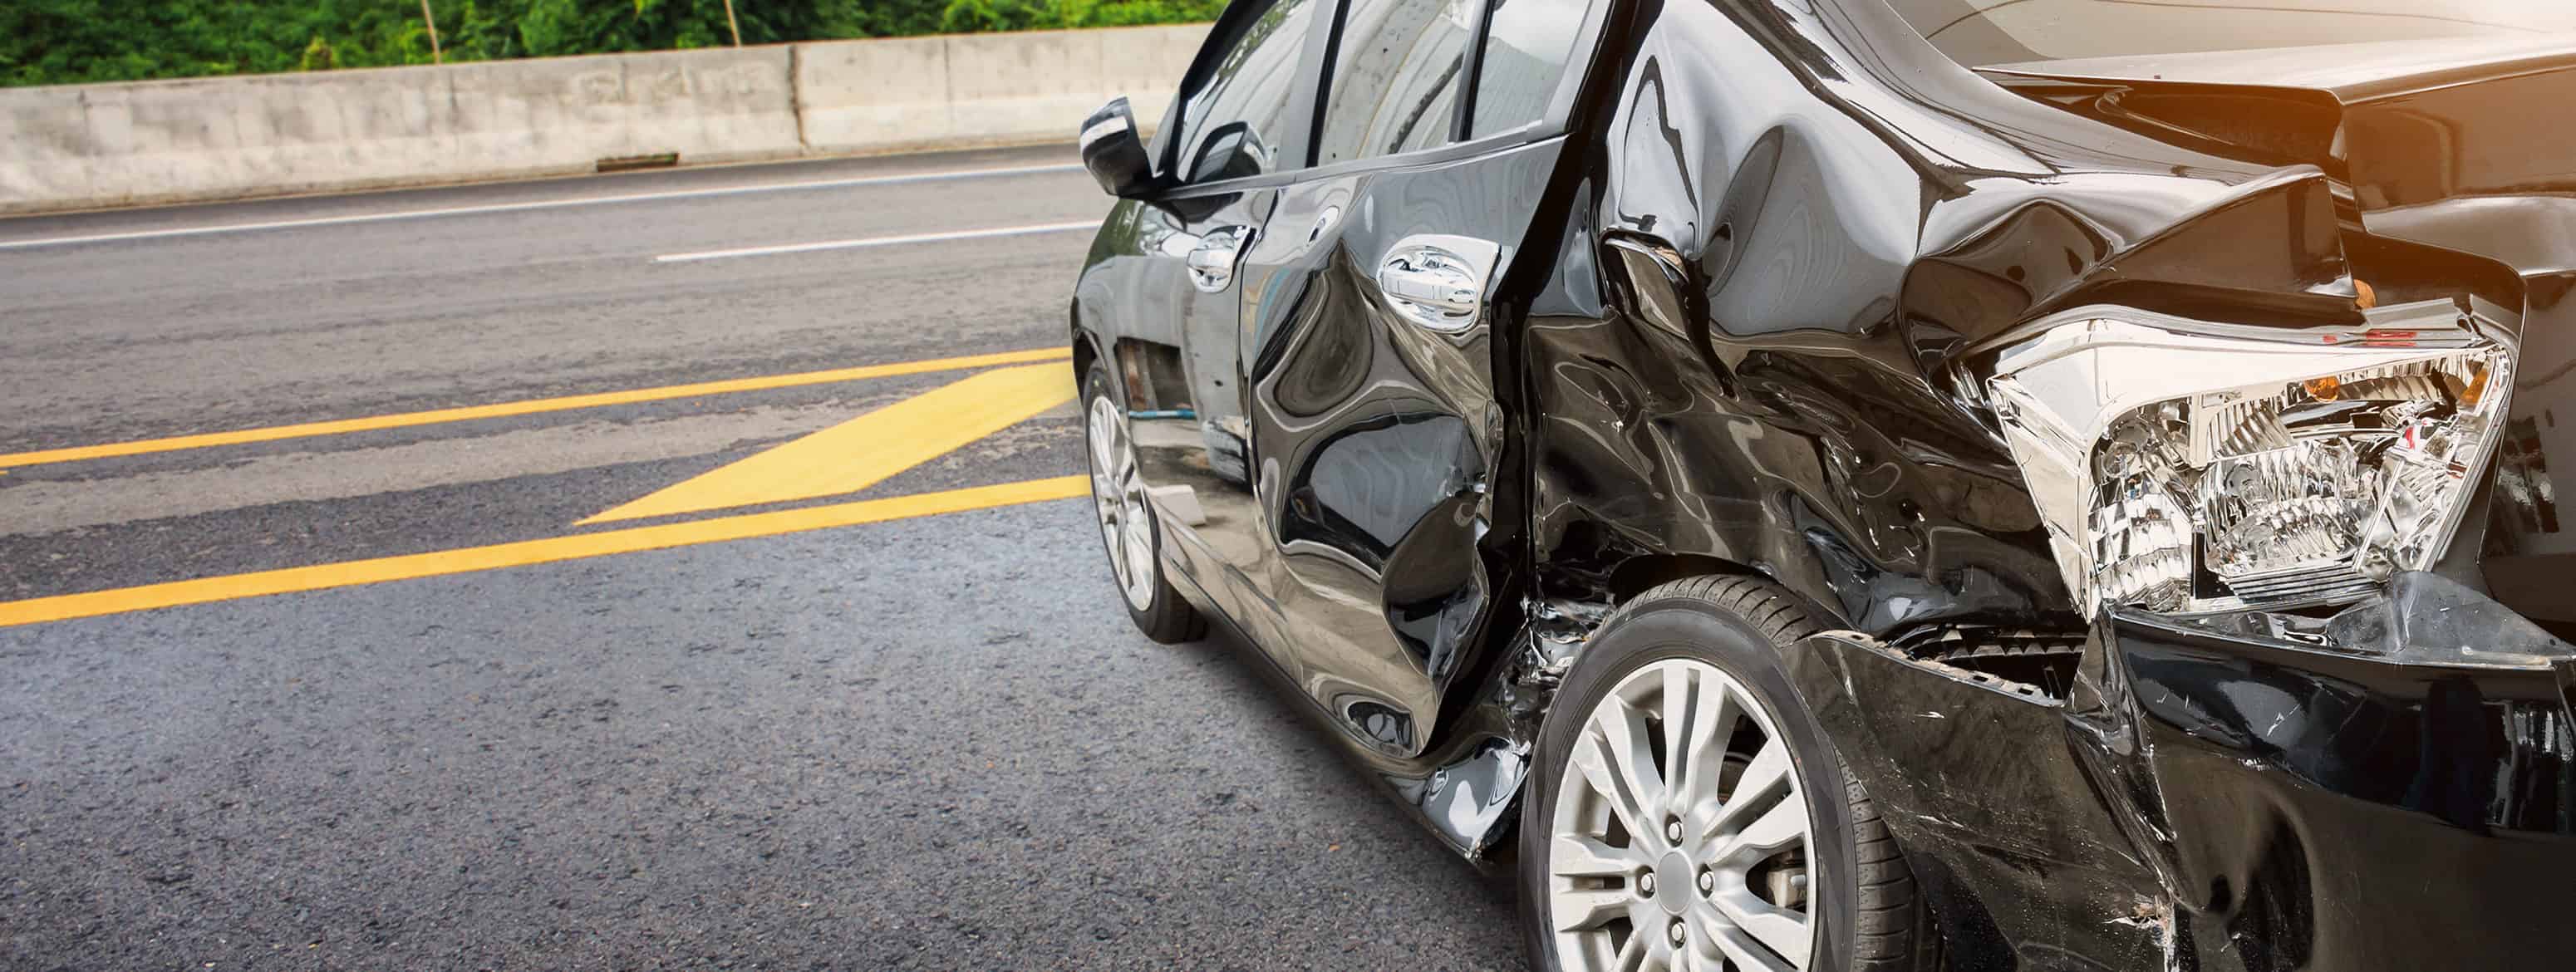 Injuries from auto accidents often require the assistance of a personal injury attorney.